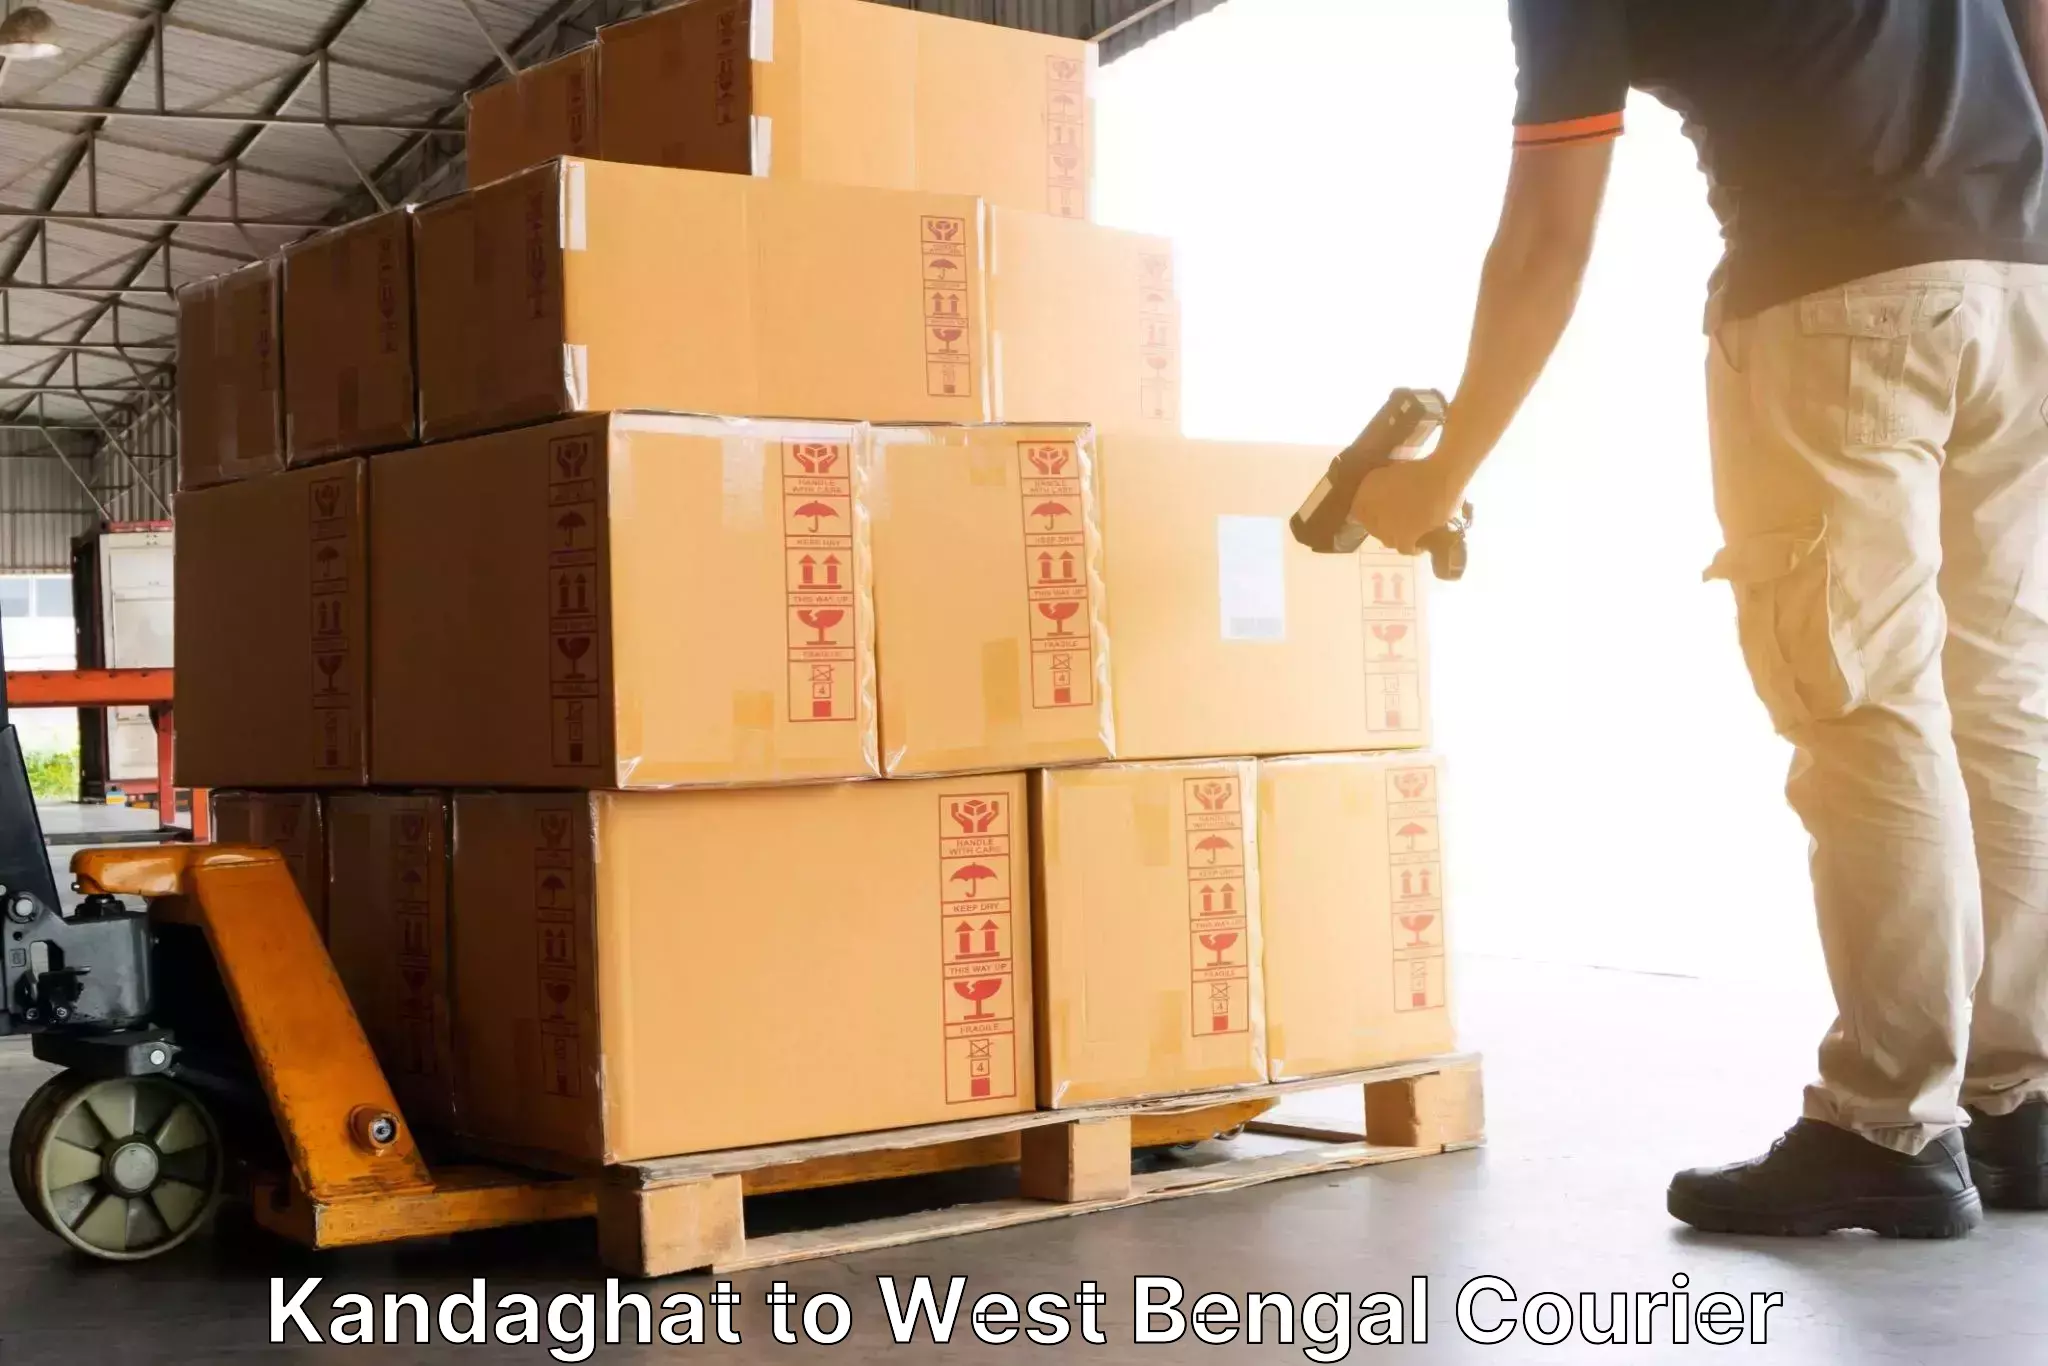 Secure shipping methods Kandaghat to South 24 Parganas